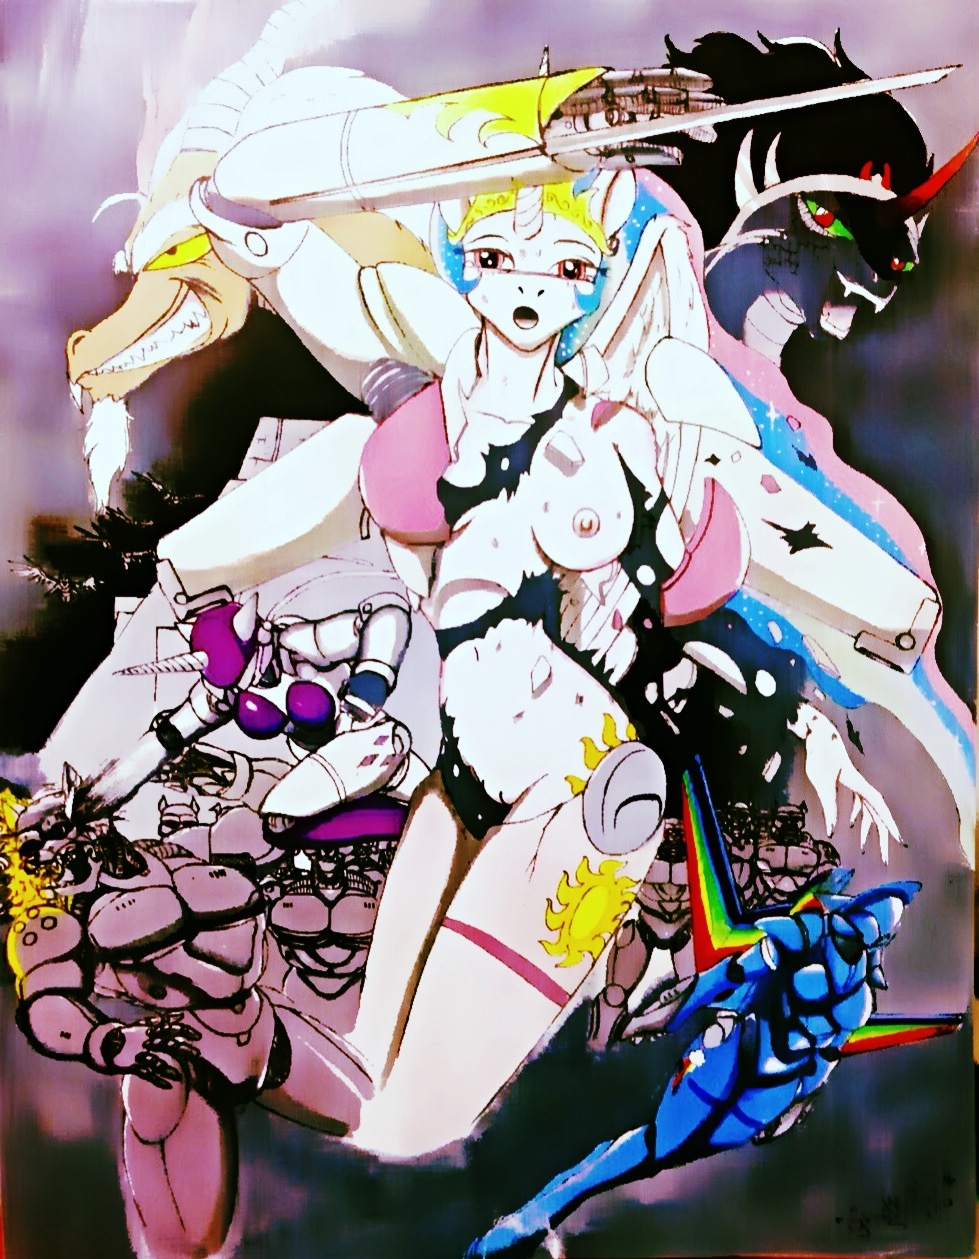 _crisis_ armor_ at bubblegum bubblegum_crisis bubblegum_crisis_2040 celestia_(my_little_pony) colored crossover hair_powered looking looking_at_viewer my_little_pony my_little_pony_freindship_is_magic_ my_little_pony_friendship_is_magic power_armor princess viwer_multi